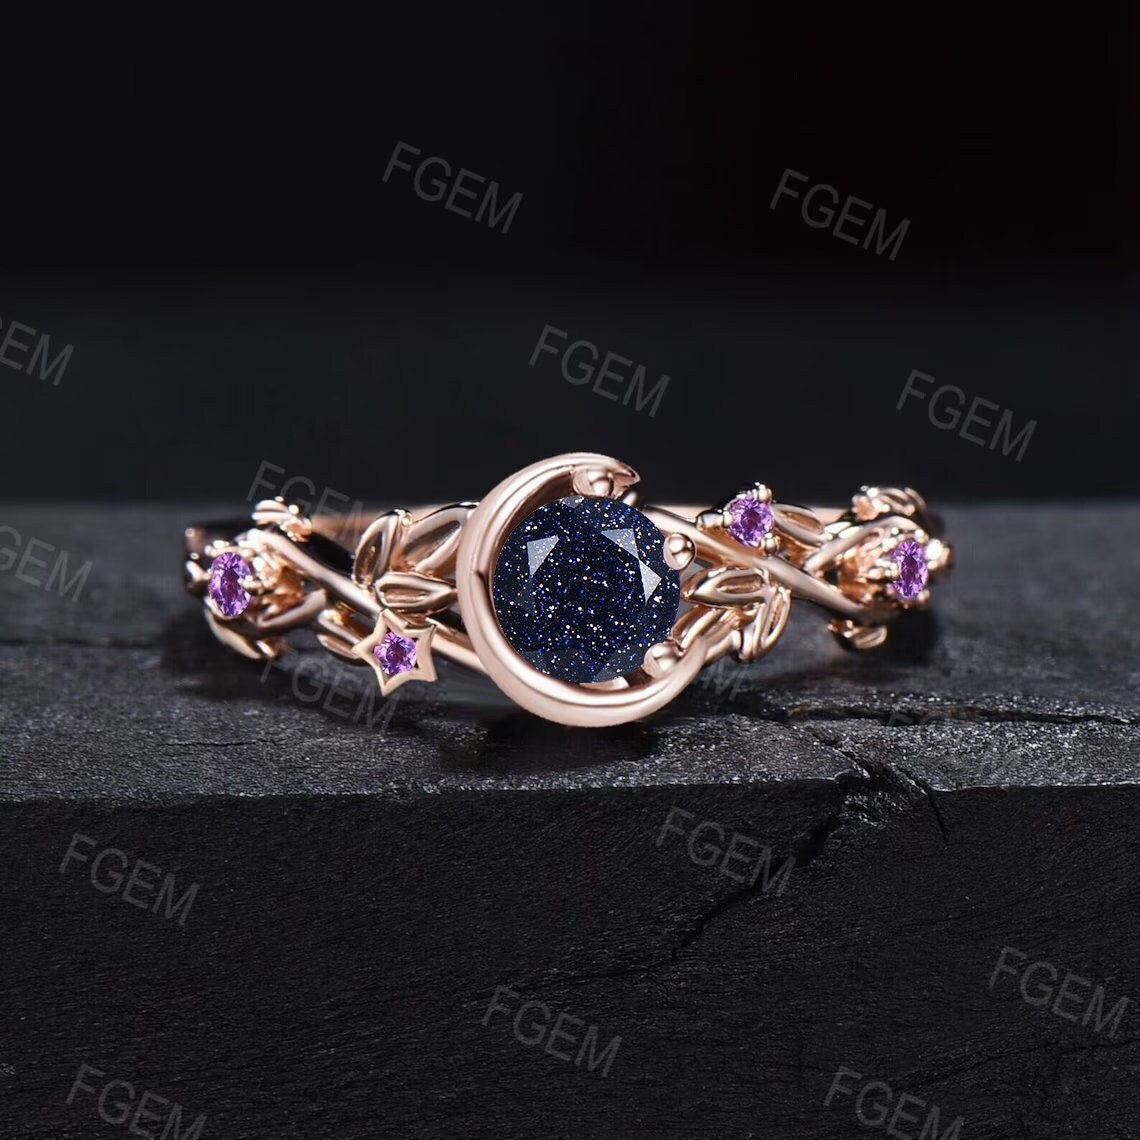 Amethyst ring vintage hexagon cut Amethyst engagement ring 14k white g –  WILLWORK JEWELRY